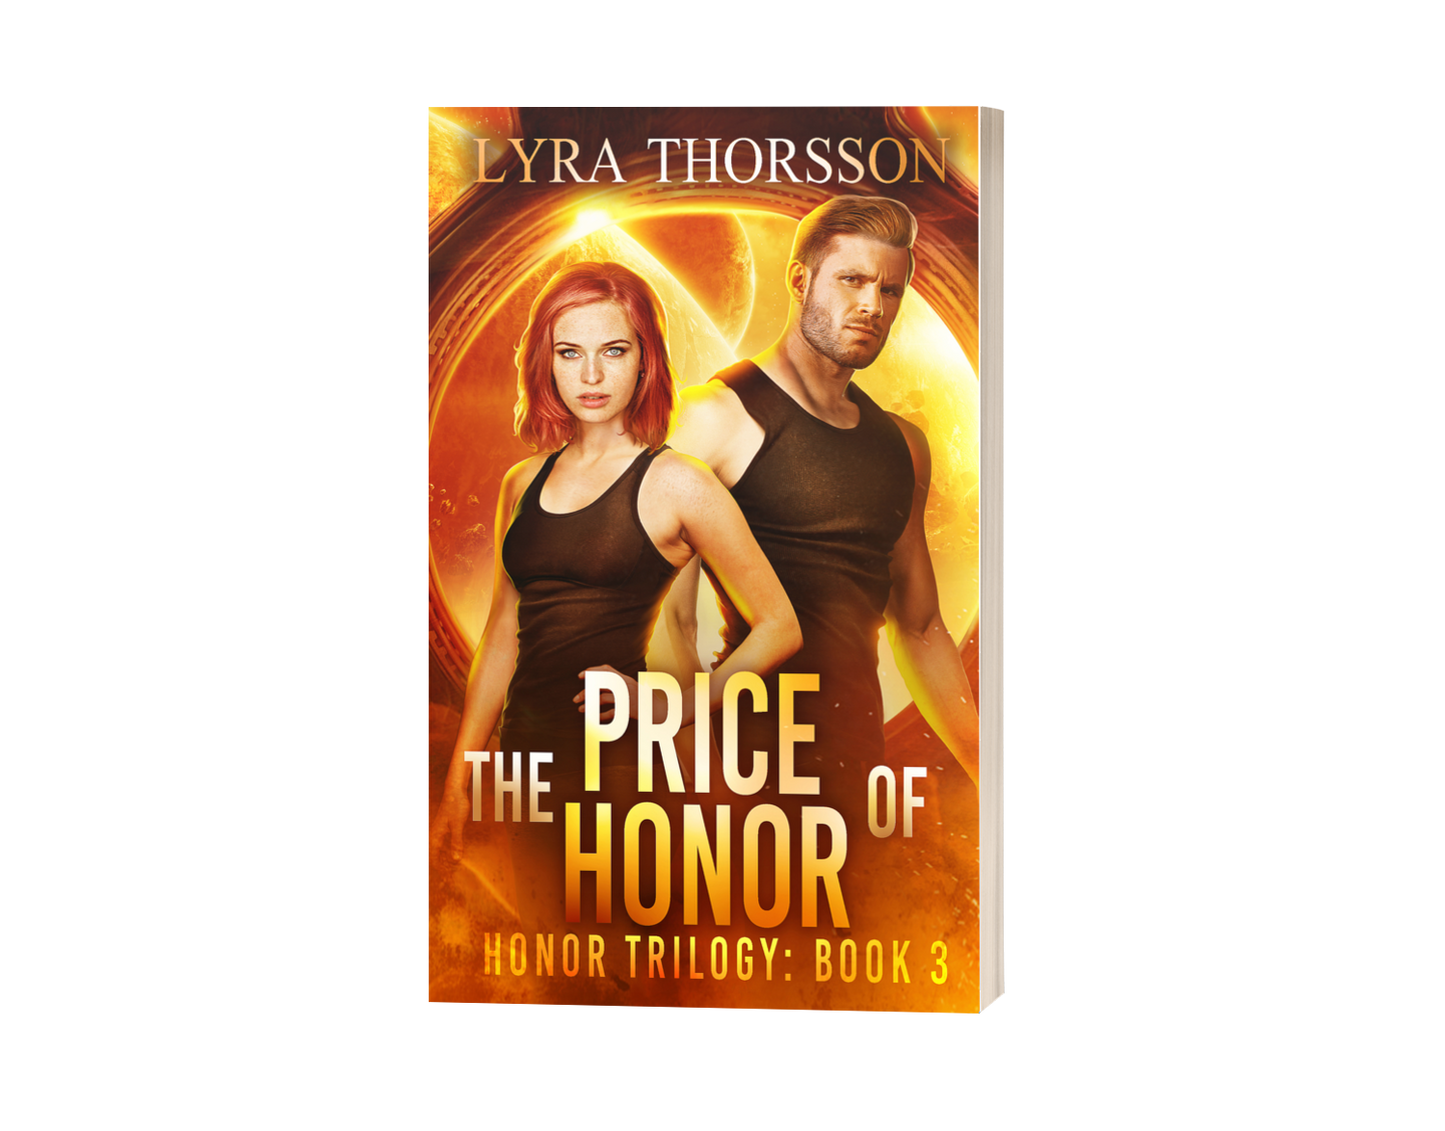 The Price of Honor (Honor Trilogy, Book 3) paperback — SIGNED